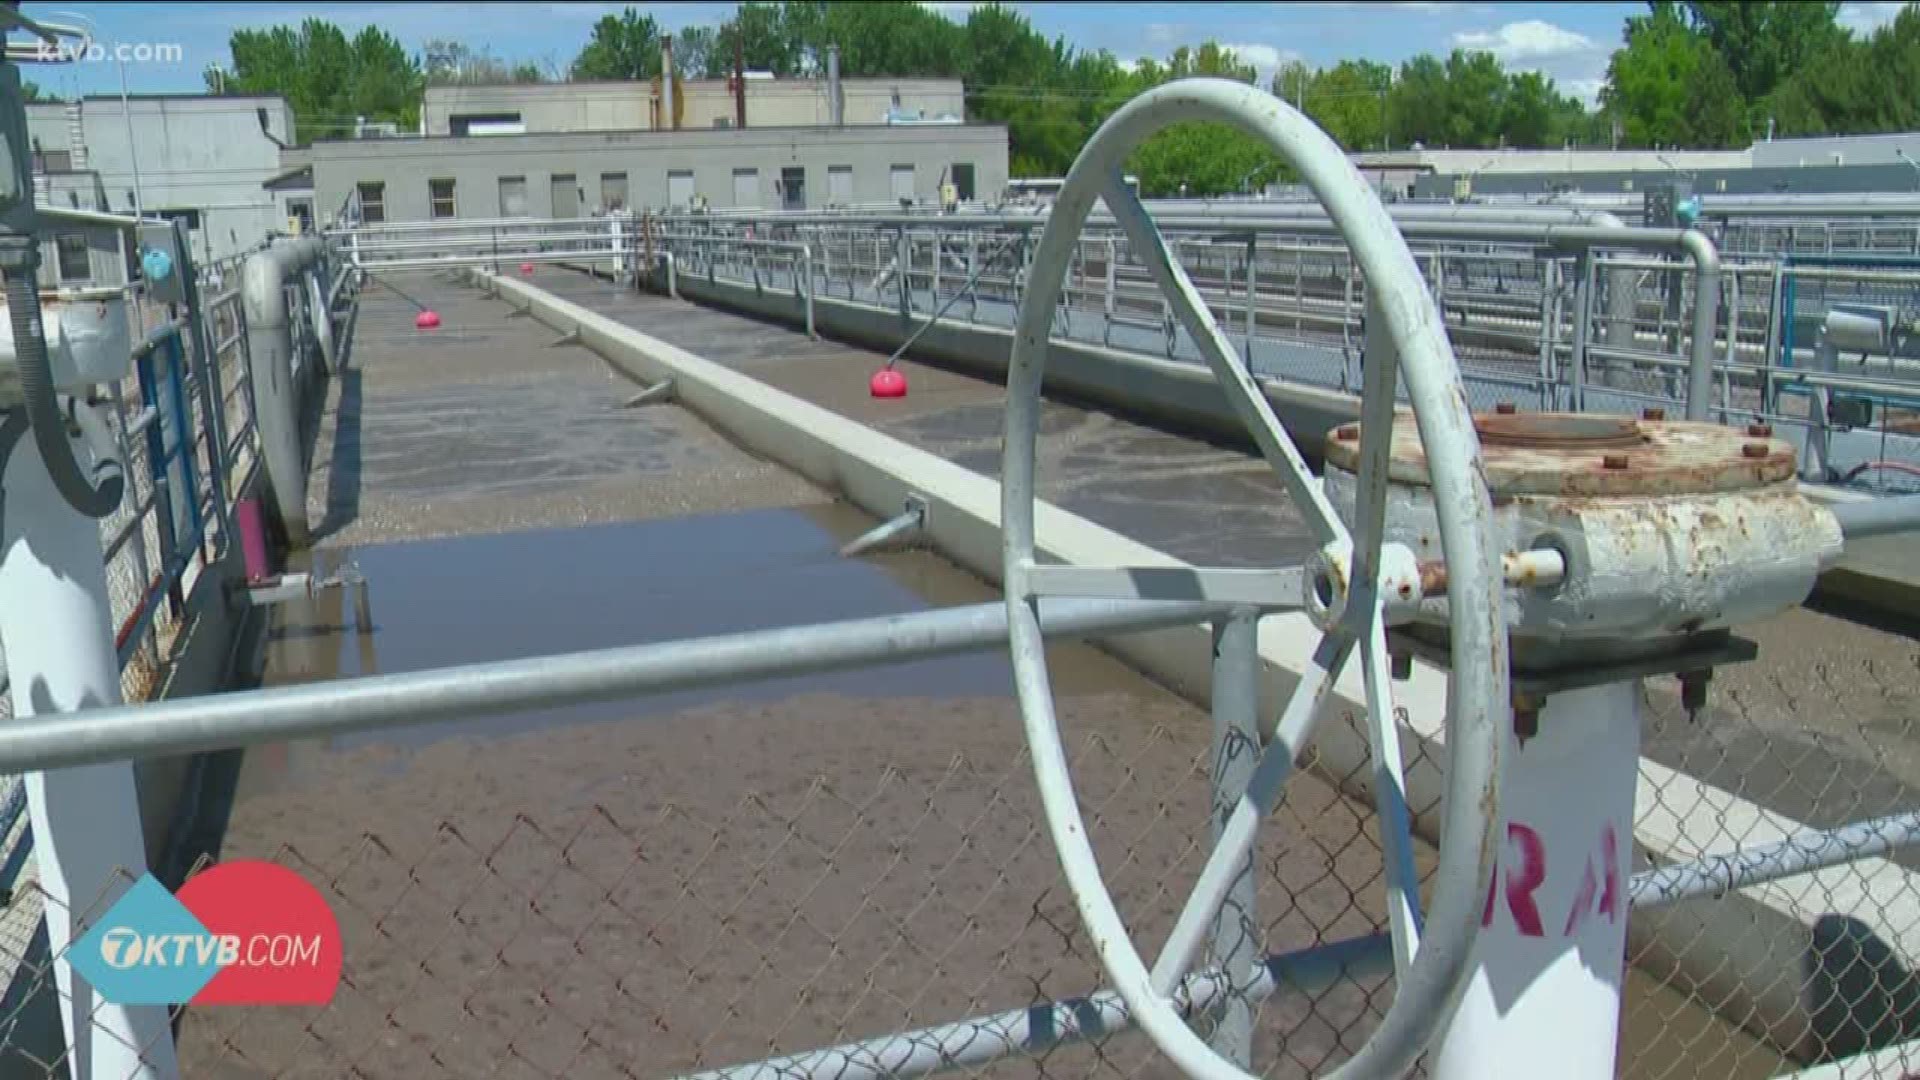 The City of Boise is hoping to track the spread of coronavirus through the collection of wastewater.